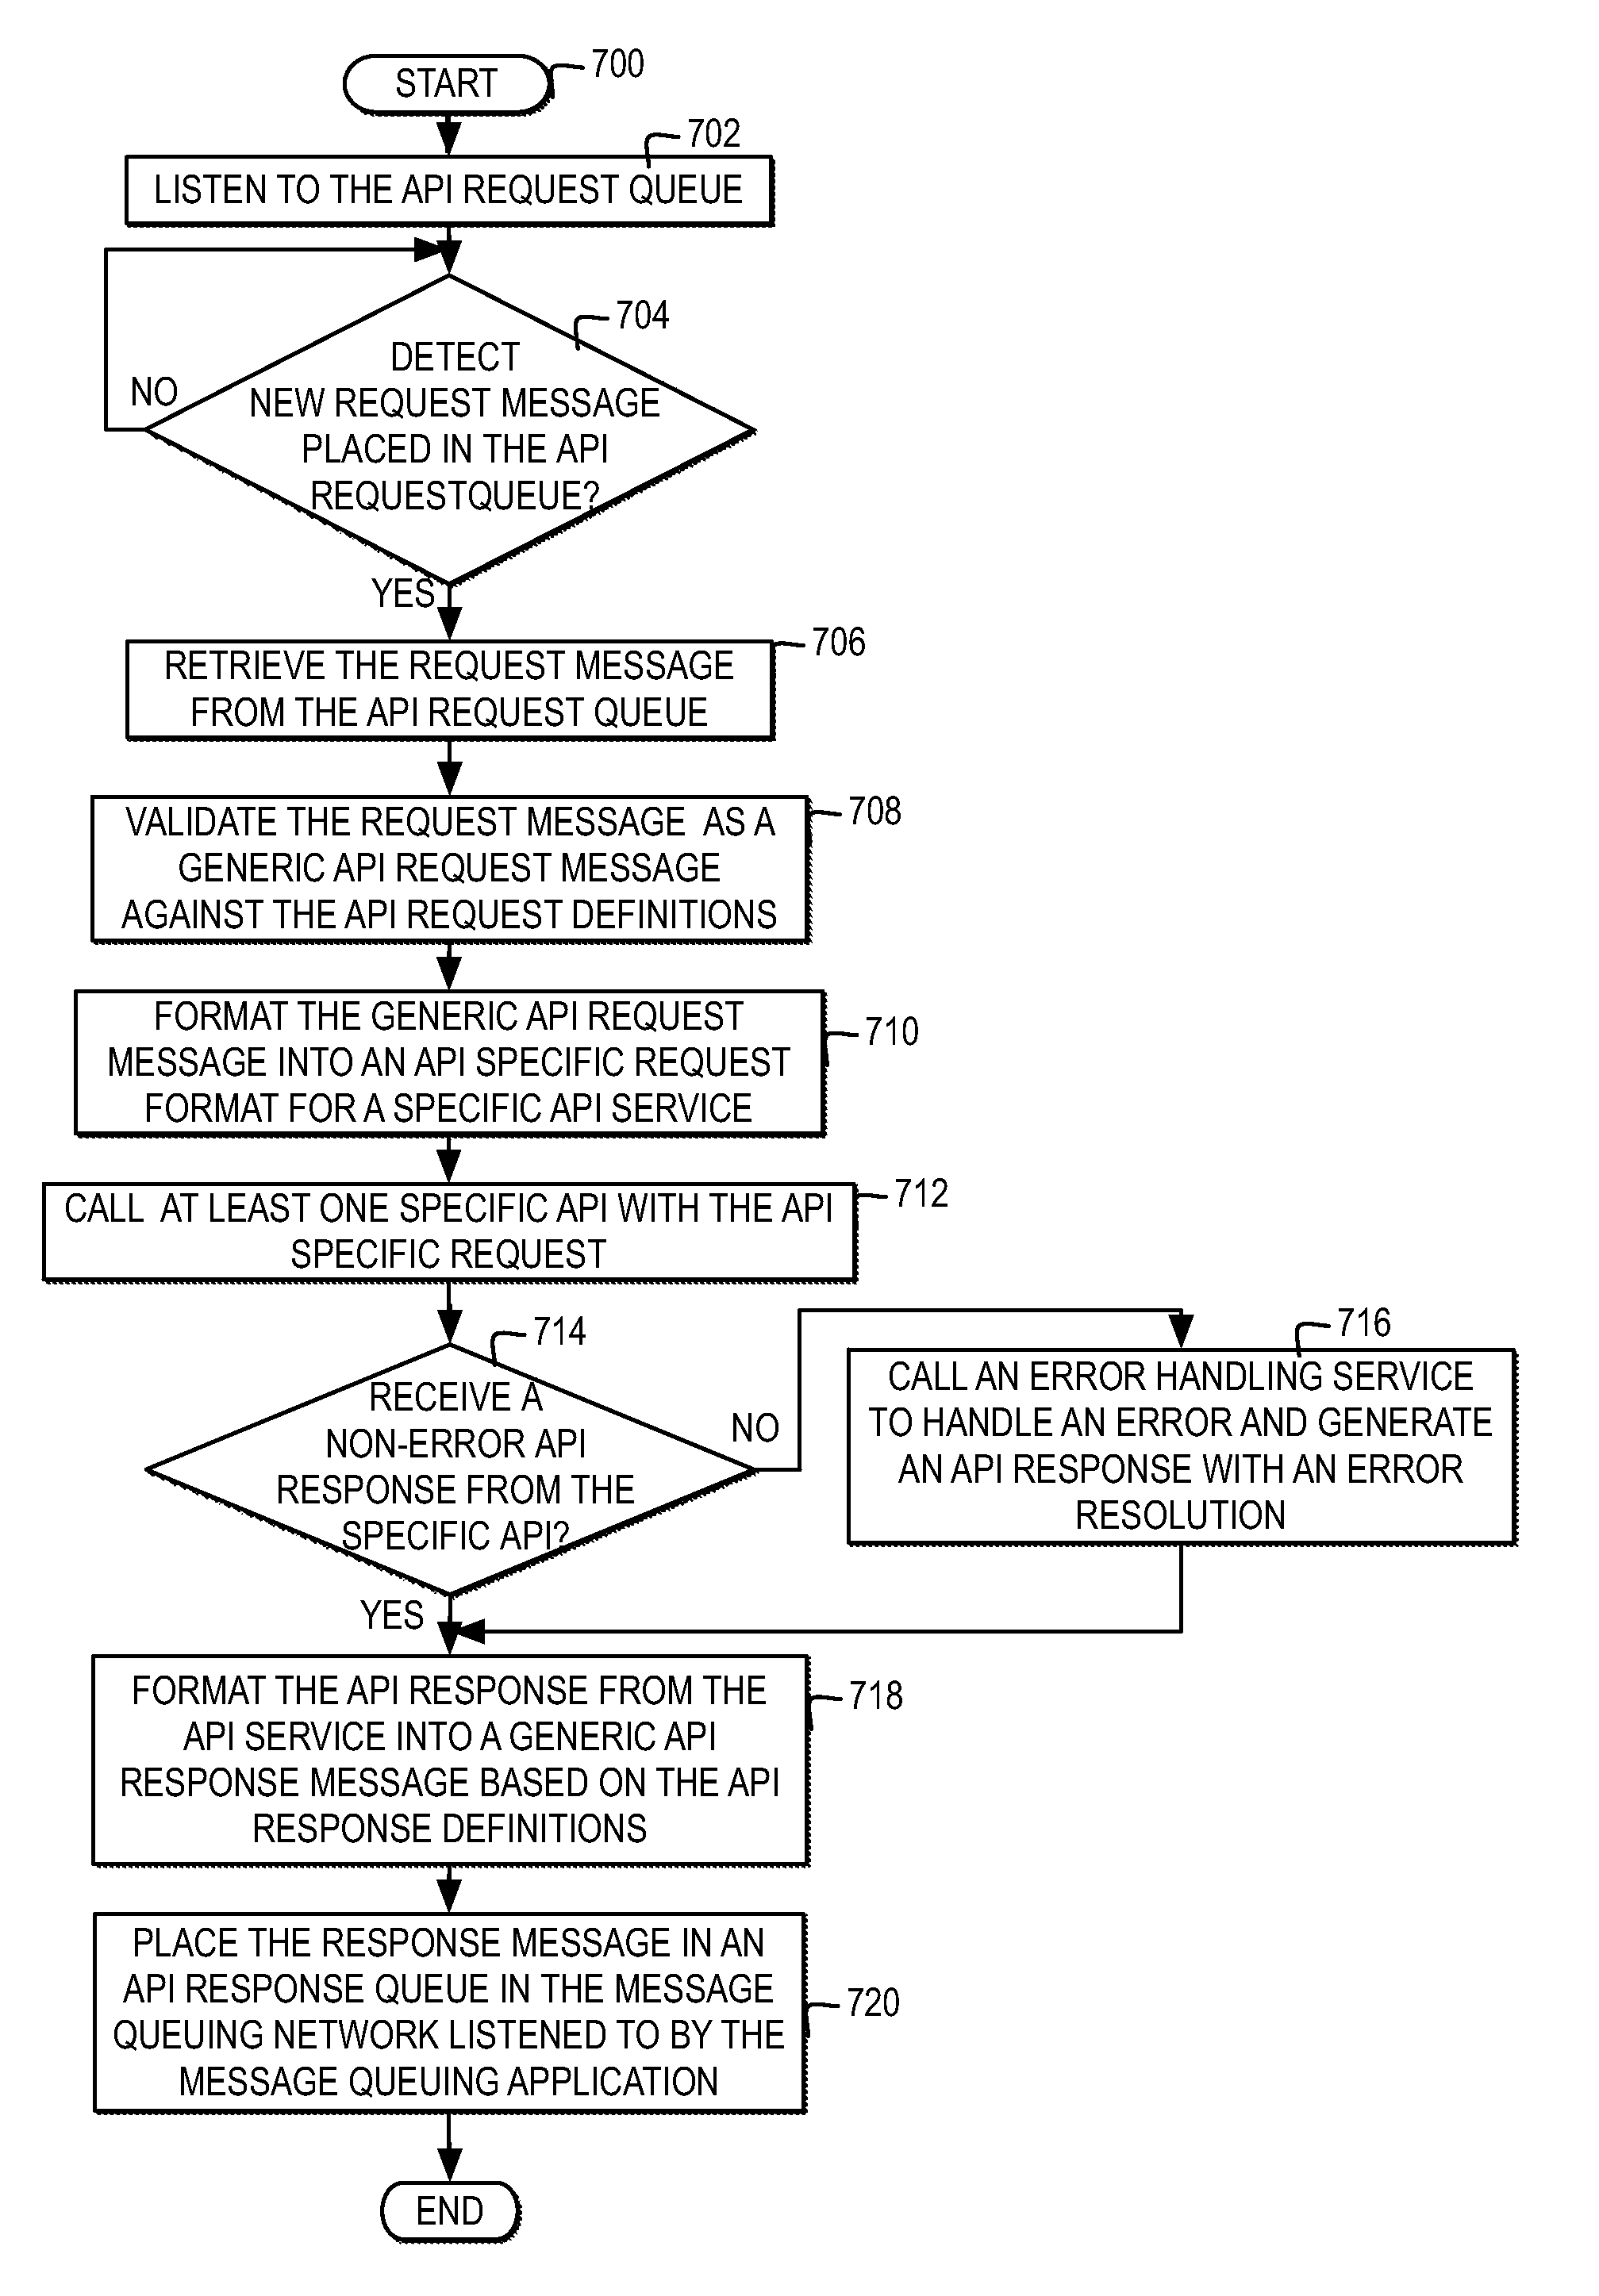 Message queuing application access to specific API services through a generic API interface integrating a message queue